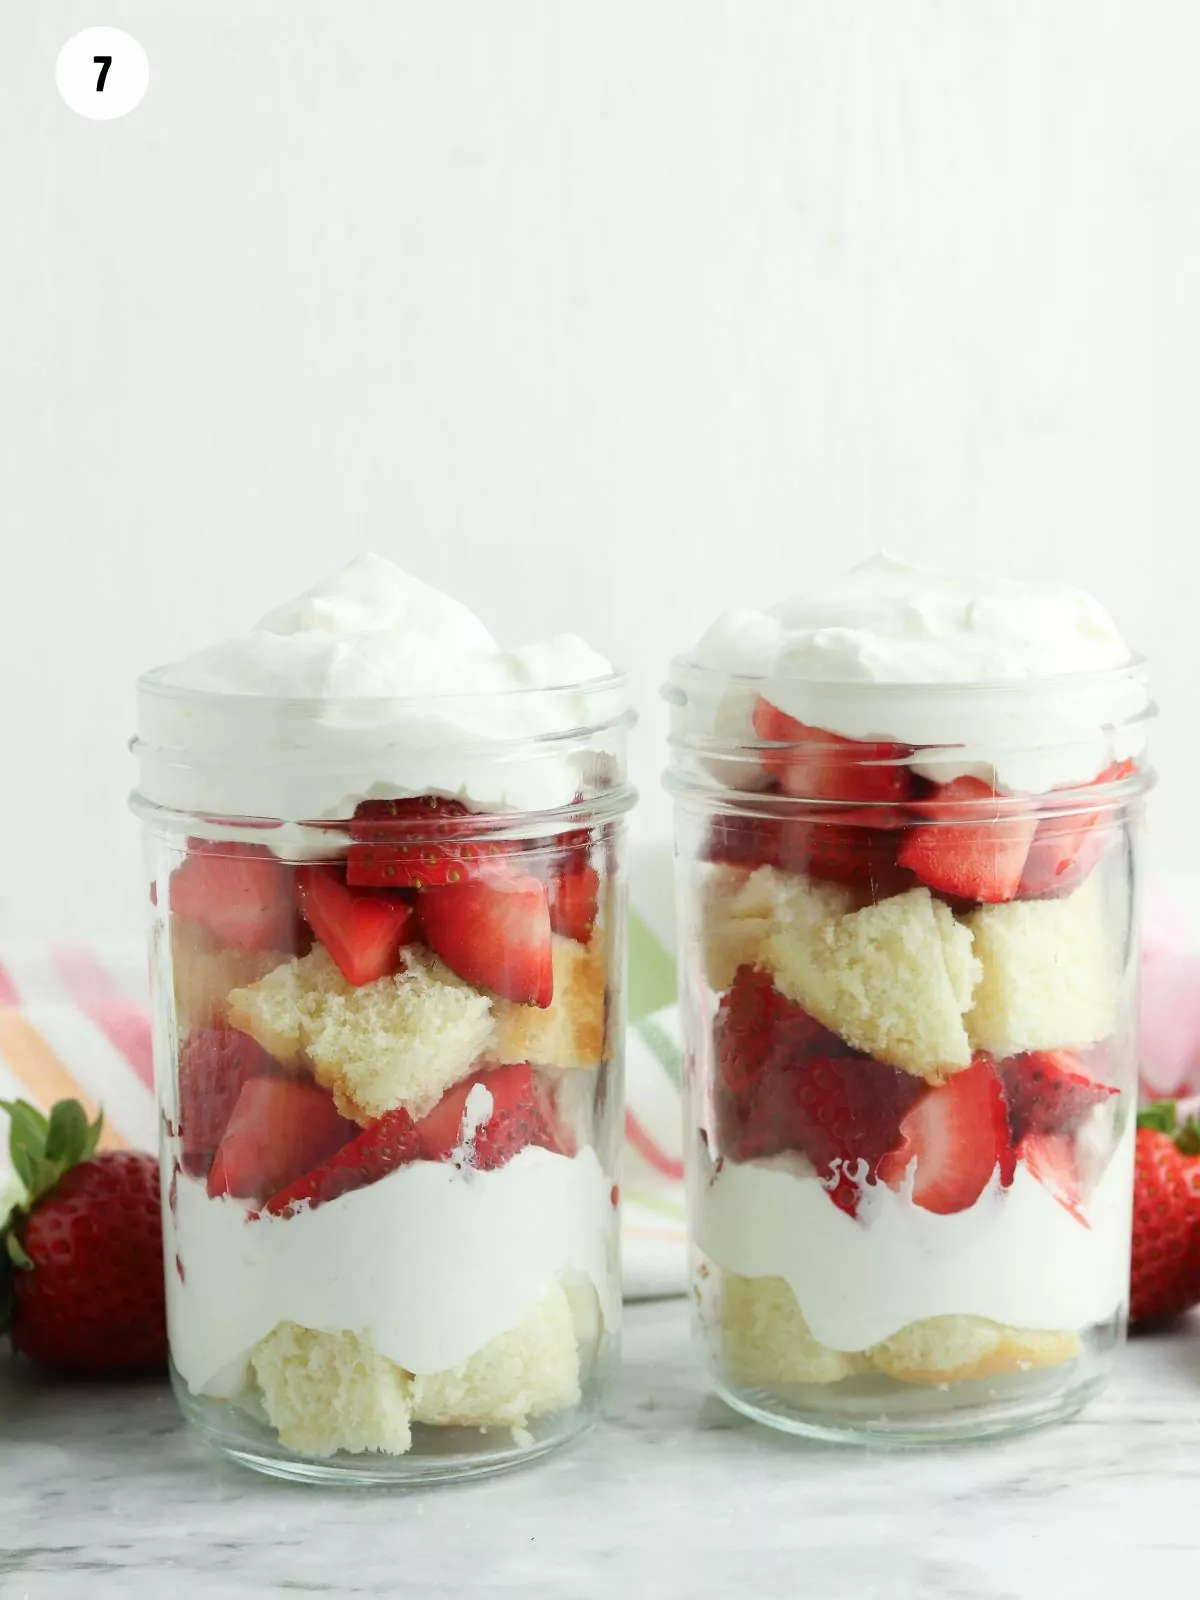 whipped cream and pound cake in jars with strawberries.